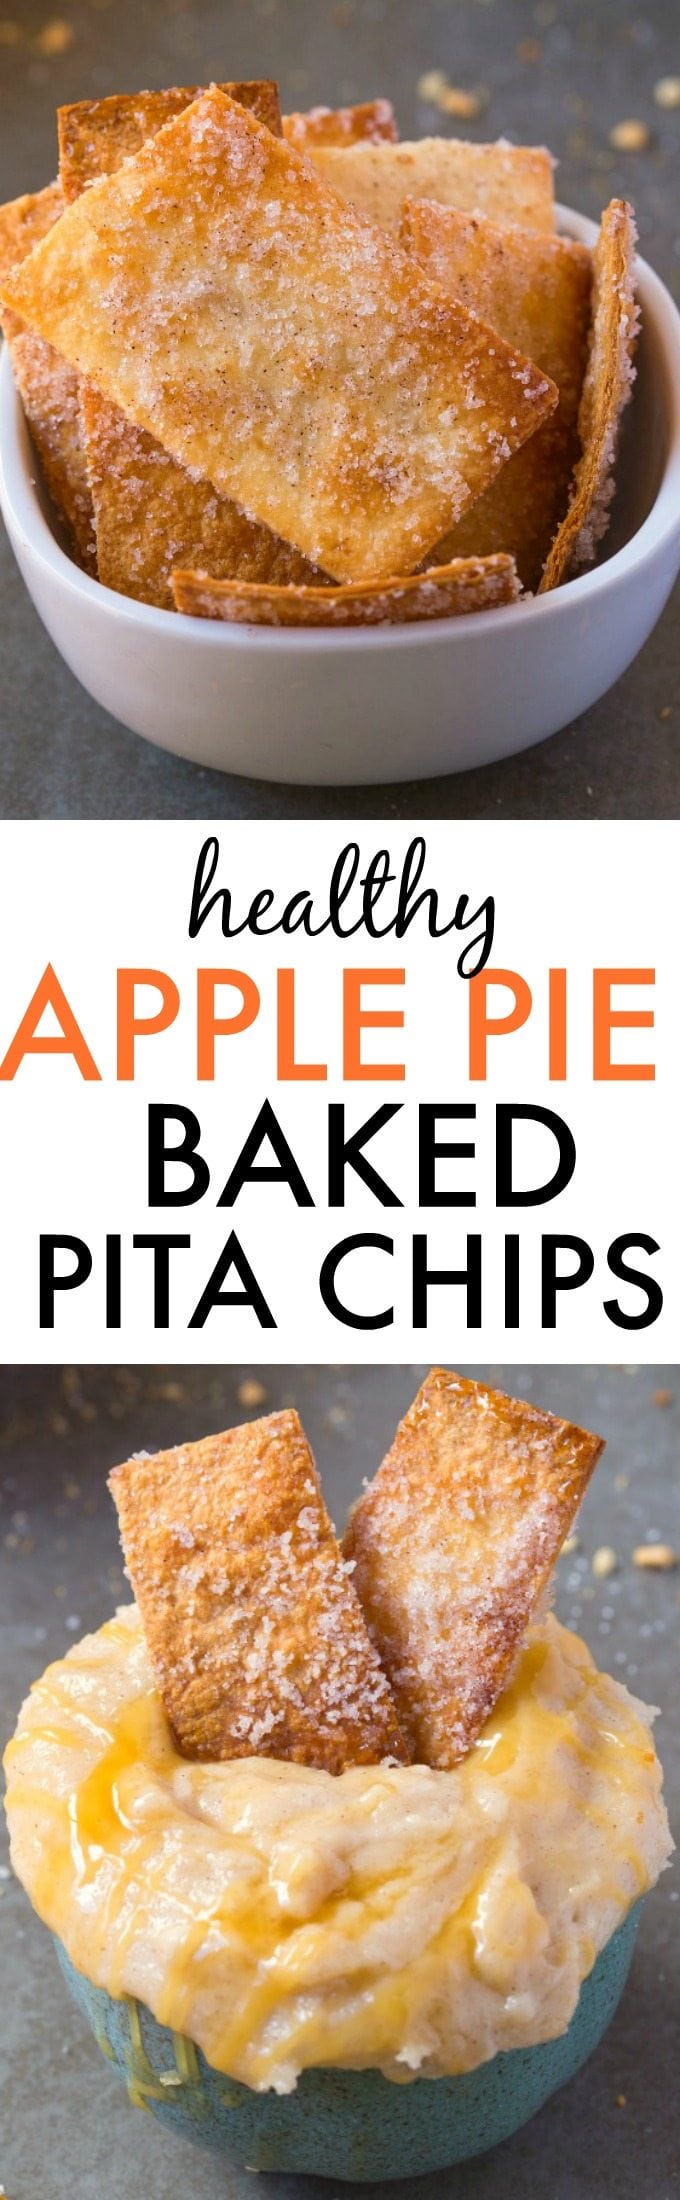 Healthy APPLE PIE BAKED PITA CHIPS! Seriously, these are so addictive but ridiculously healthy for you- Easy and delicious! {vegan, gluten free, sugar free recipe}- thebigmansworld.com